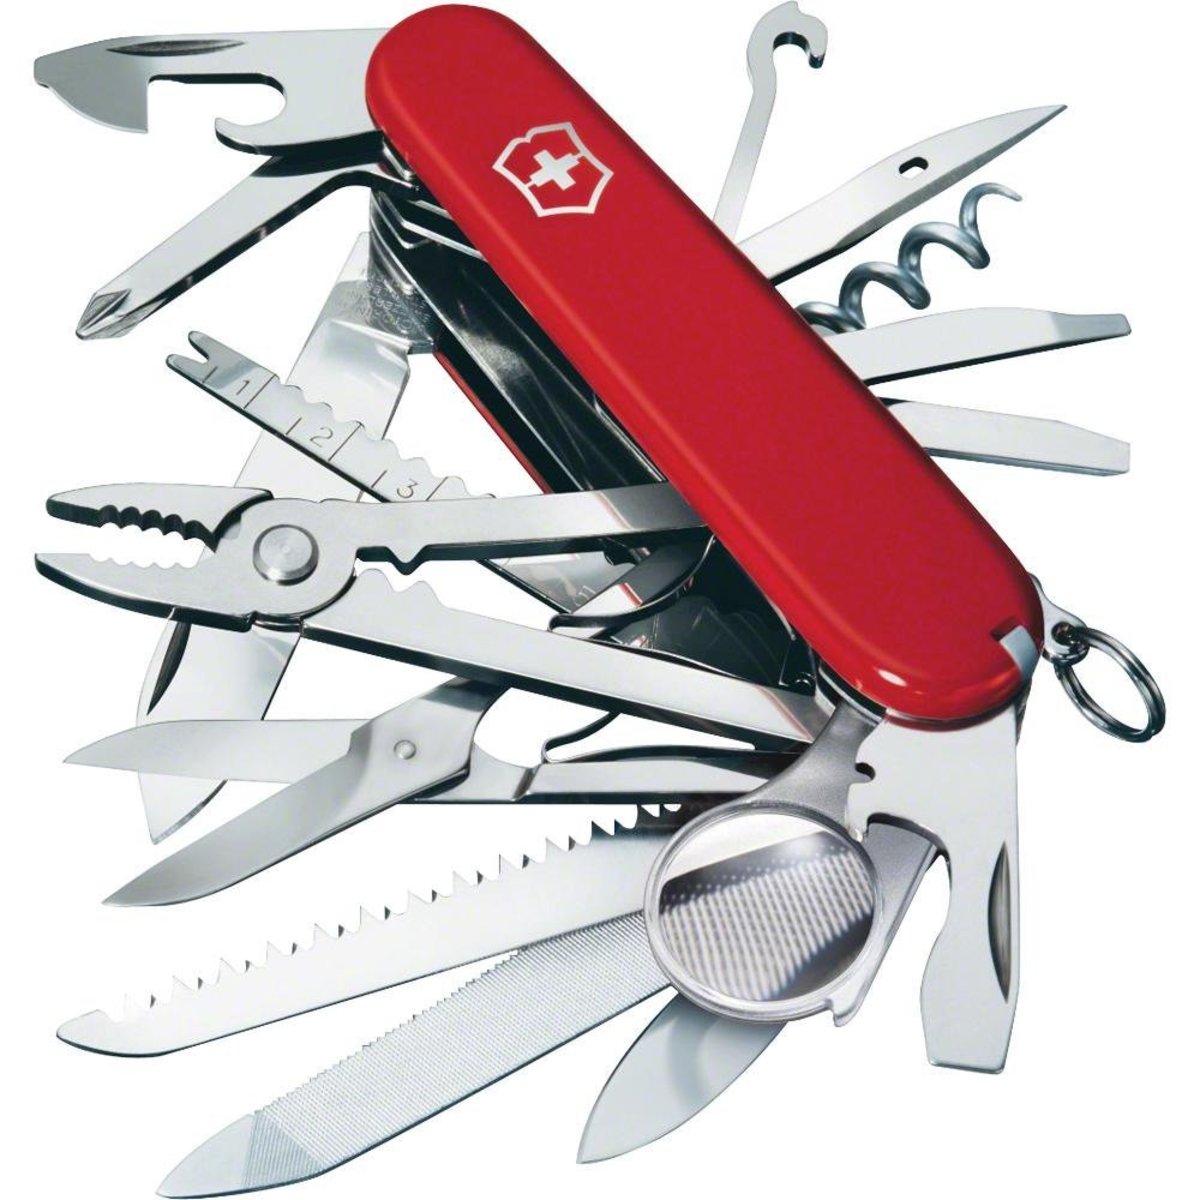 A Review of The Victorinox SwissChamp: The Ultimate Swiss Army Knife